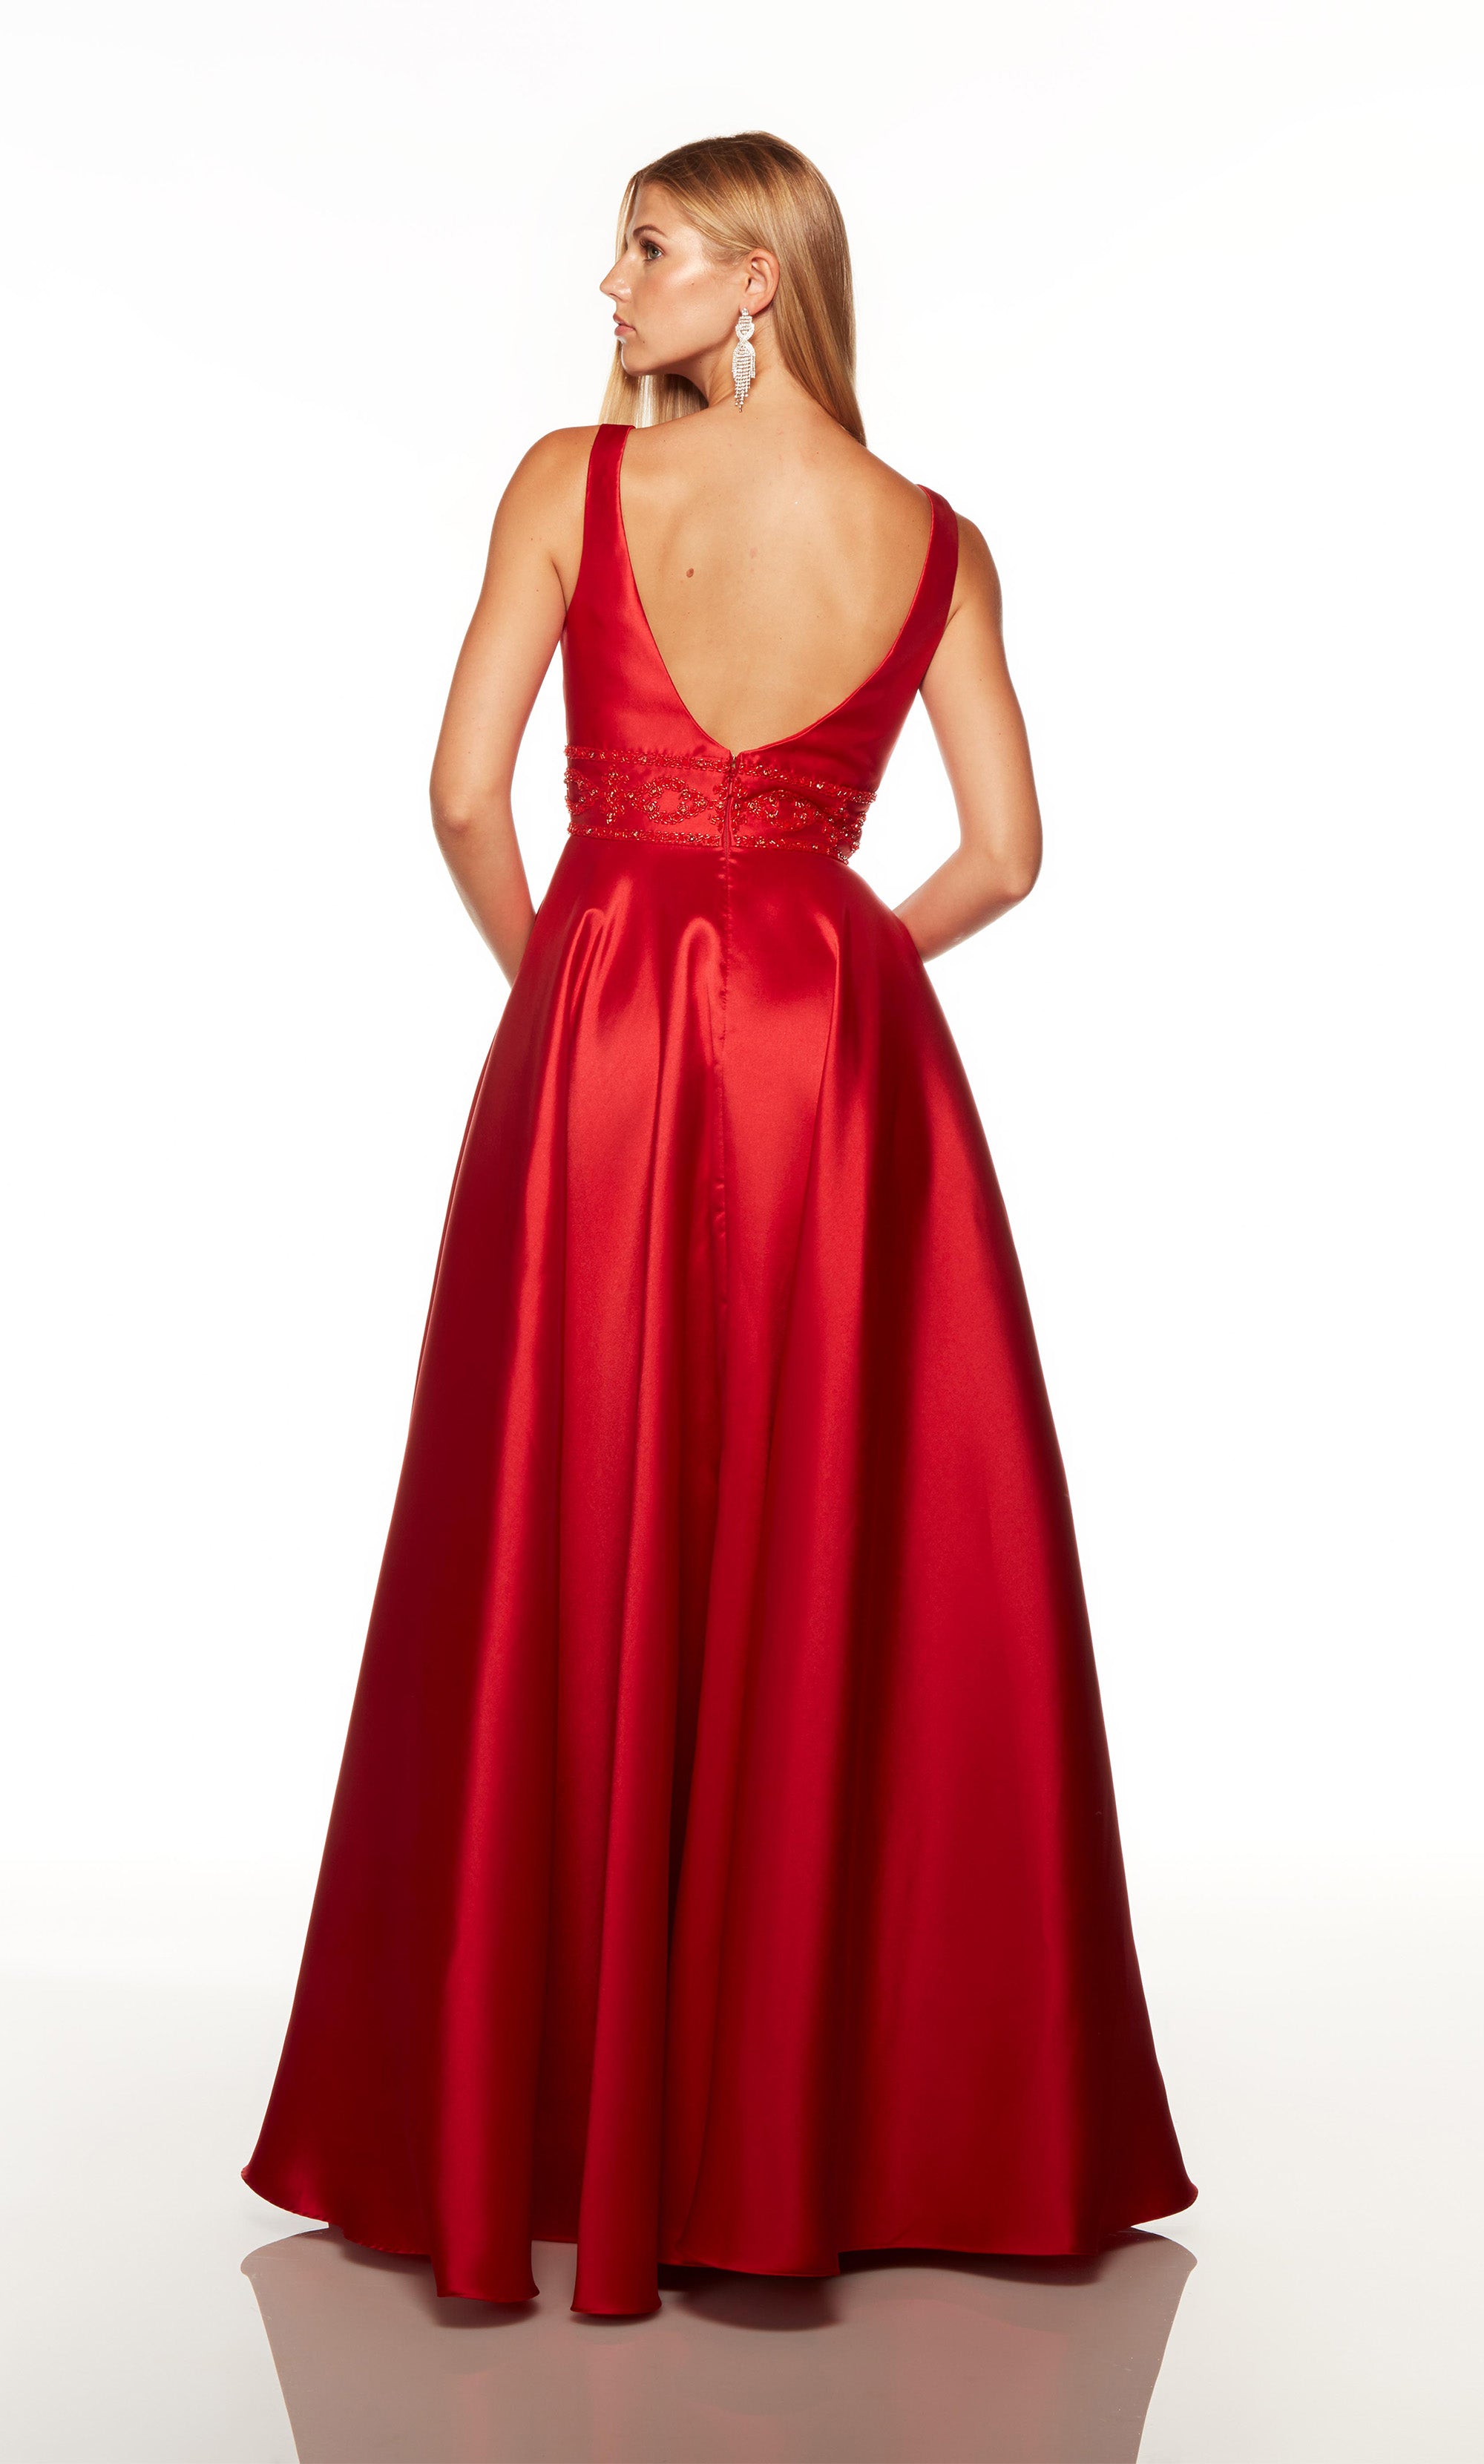 Elegant prom dress with a plunging neckline, pockets, and high slit in red. COLOR-SWATCH_1750__RED